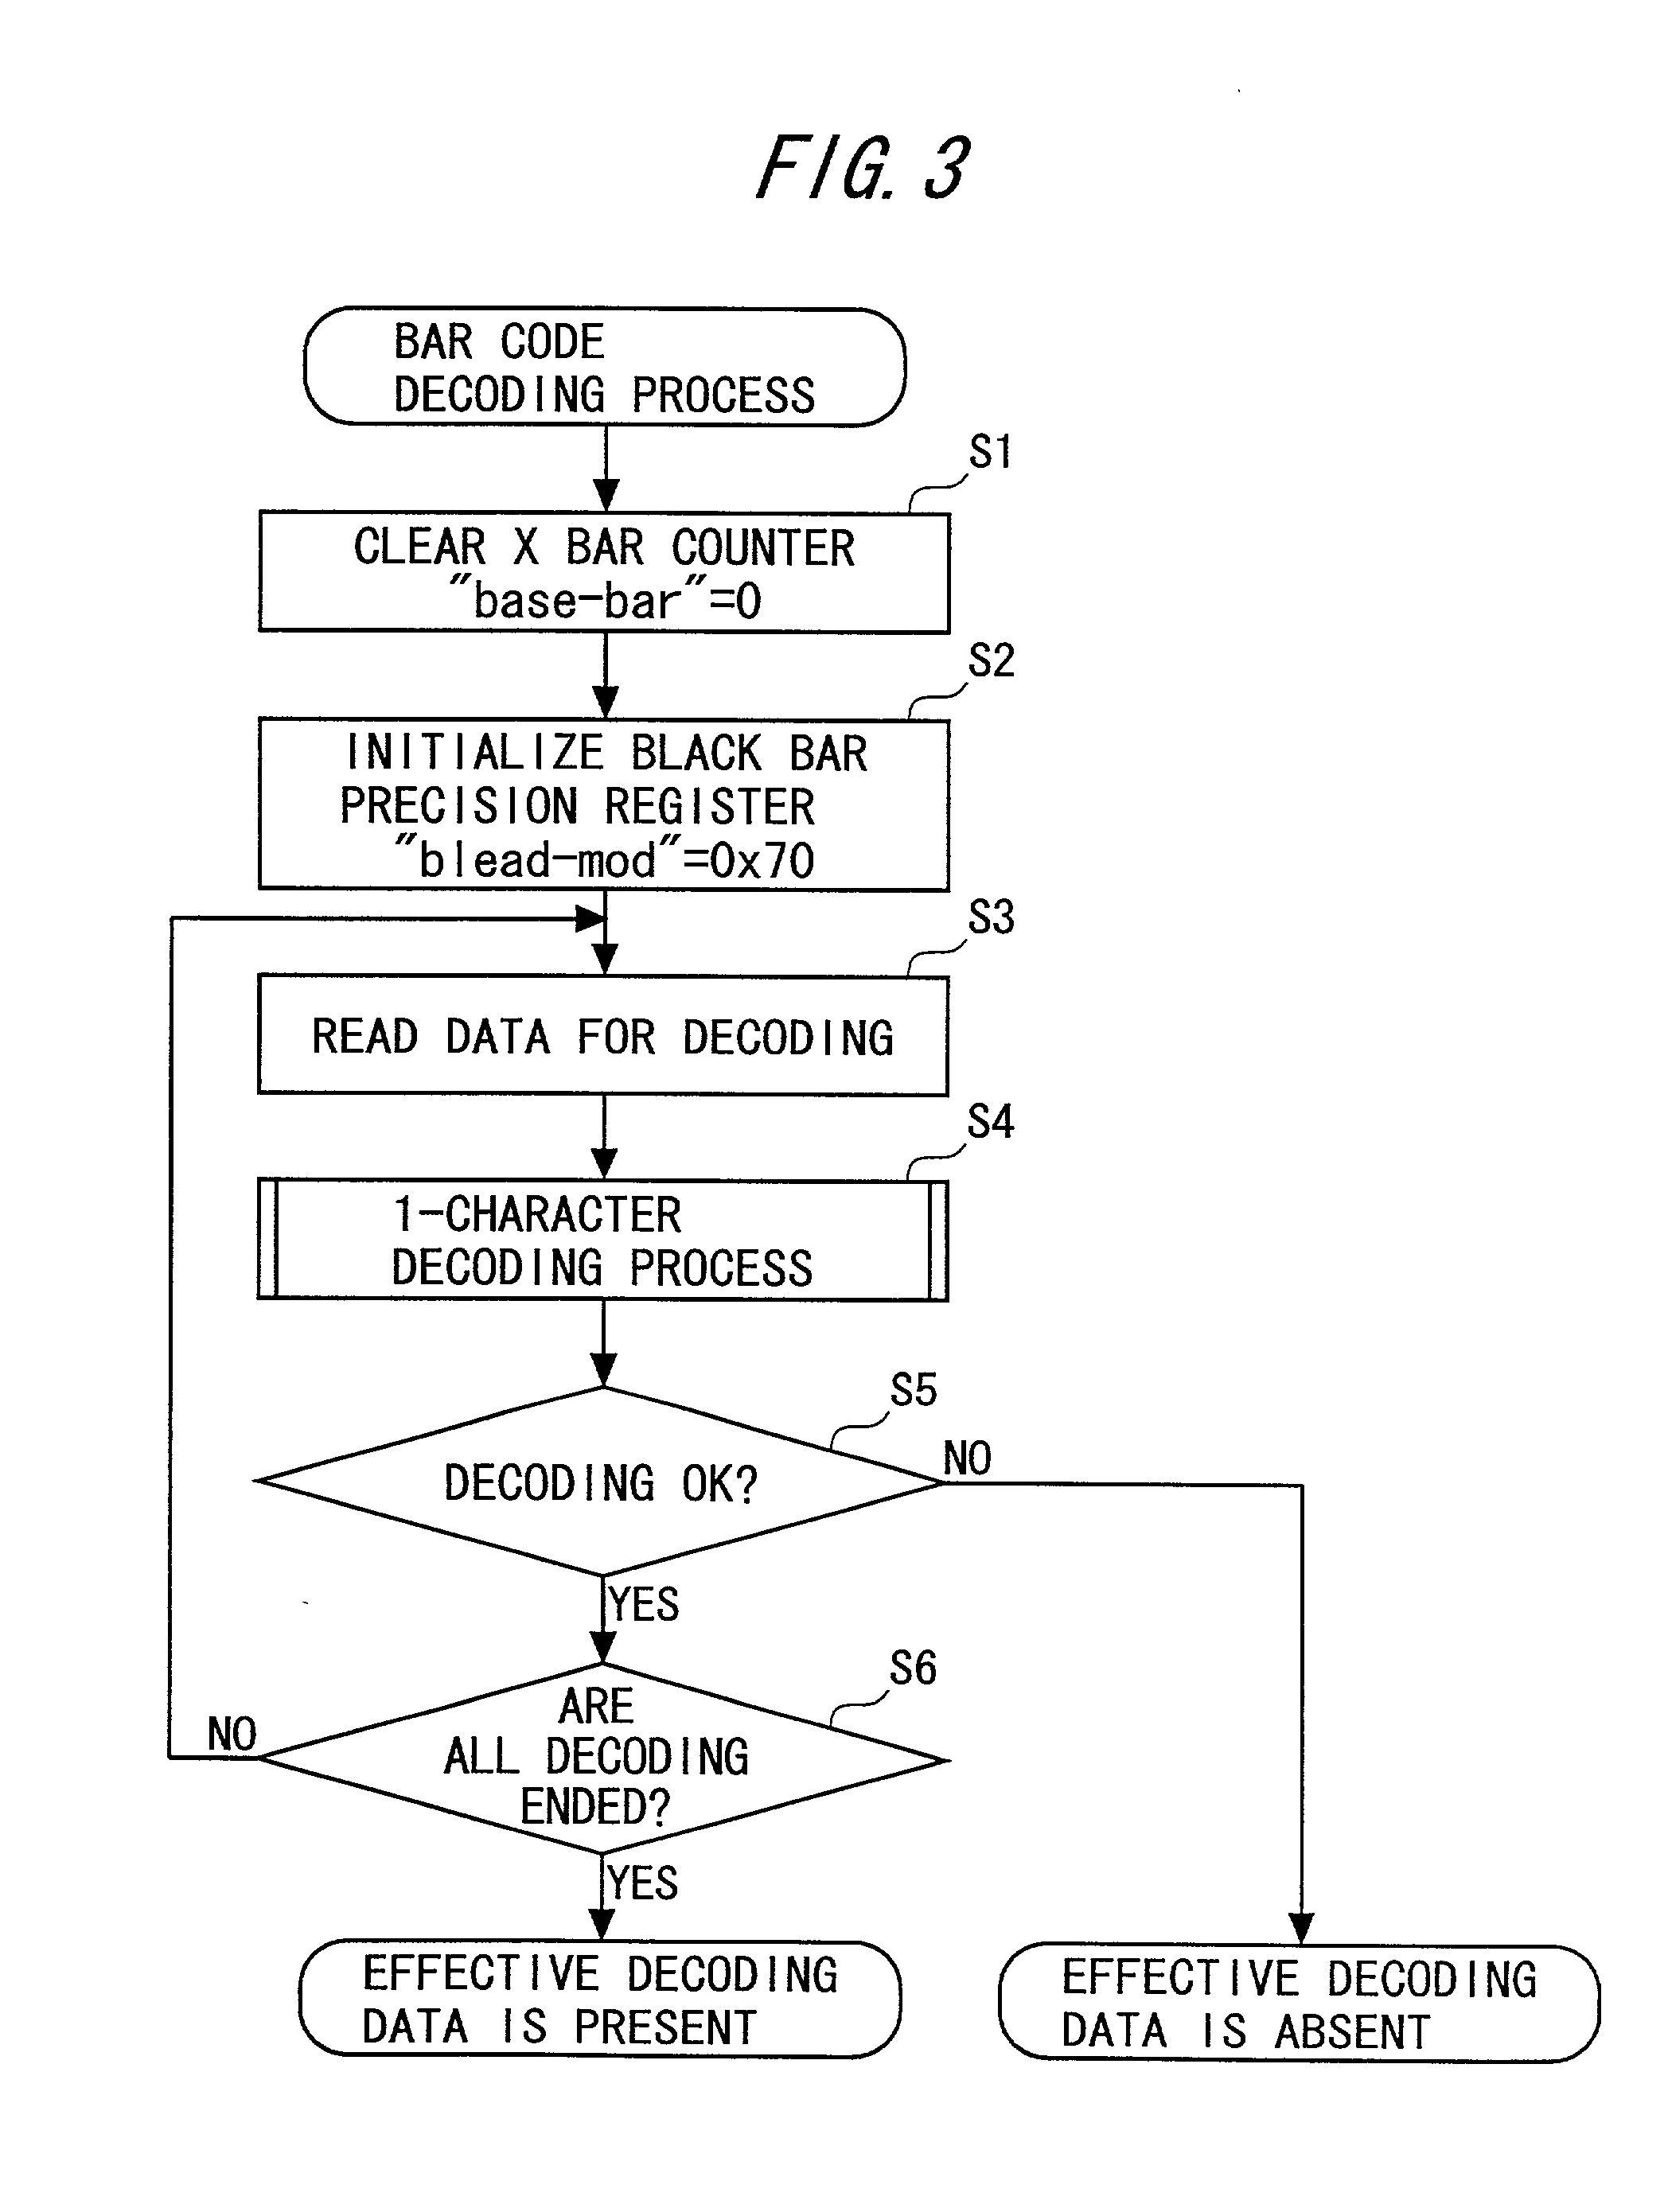 Apparatus and method for correcting bar width, bar code reader, and method for decoding bar code